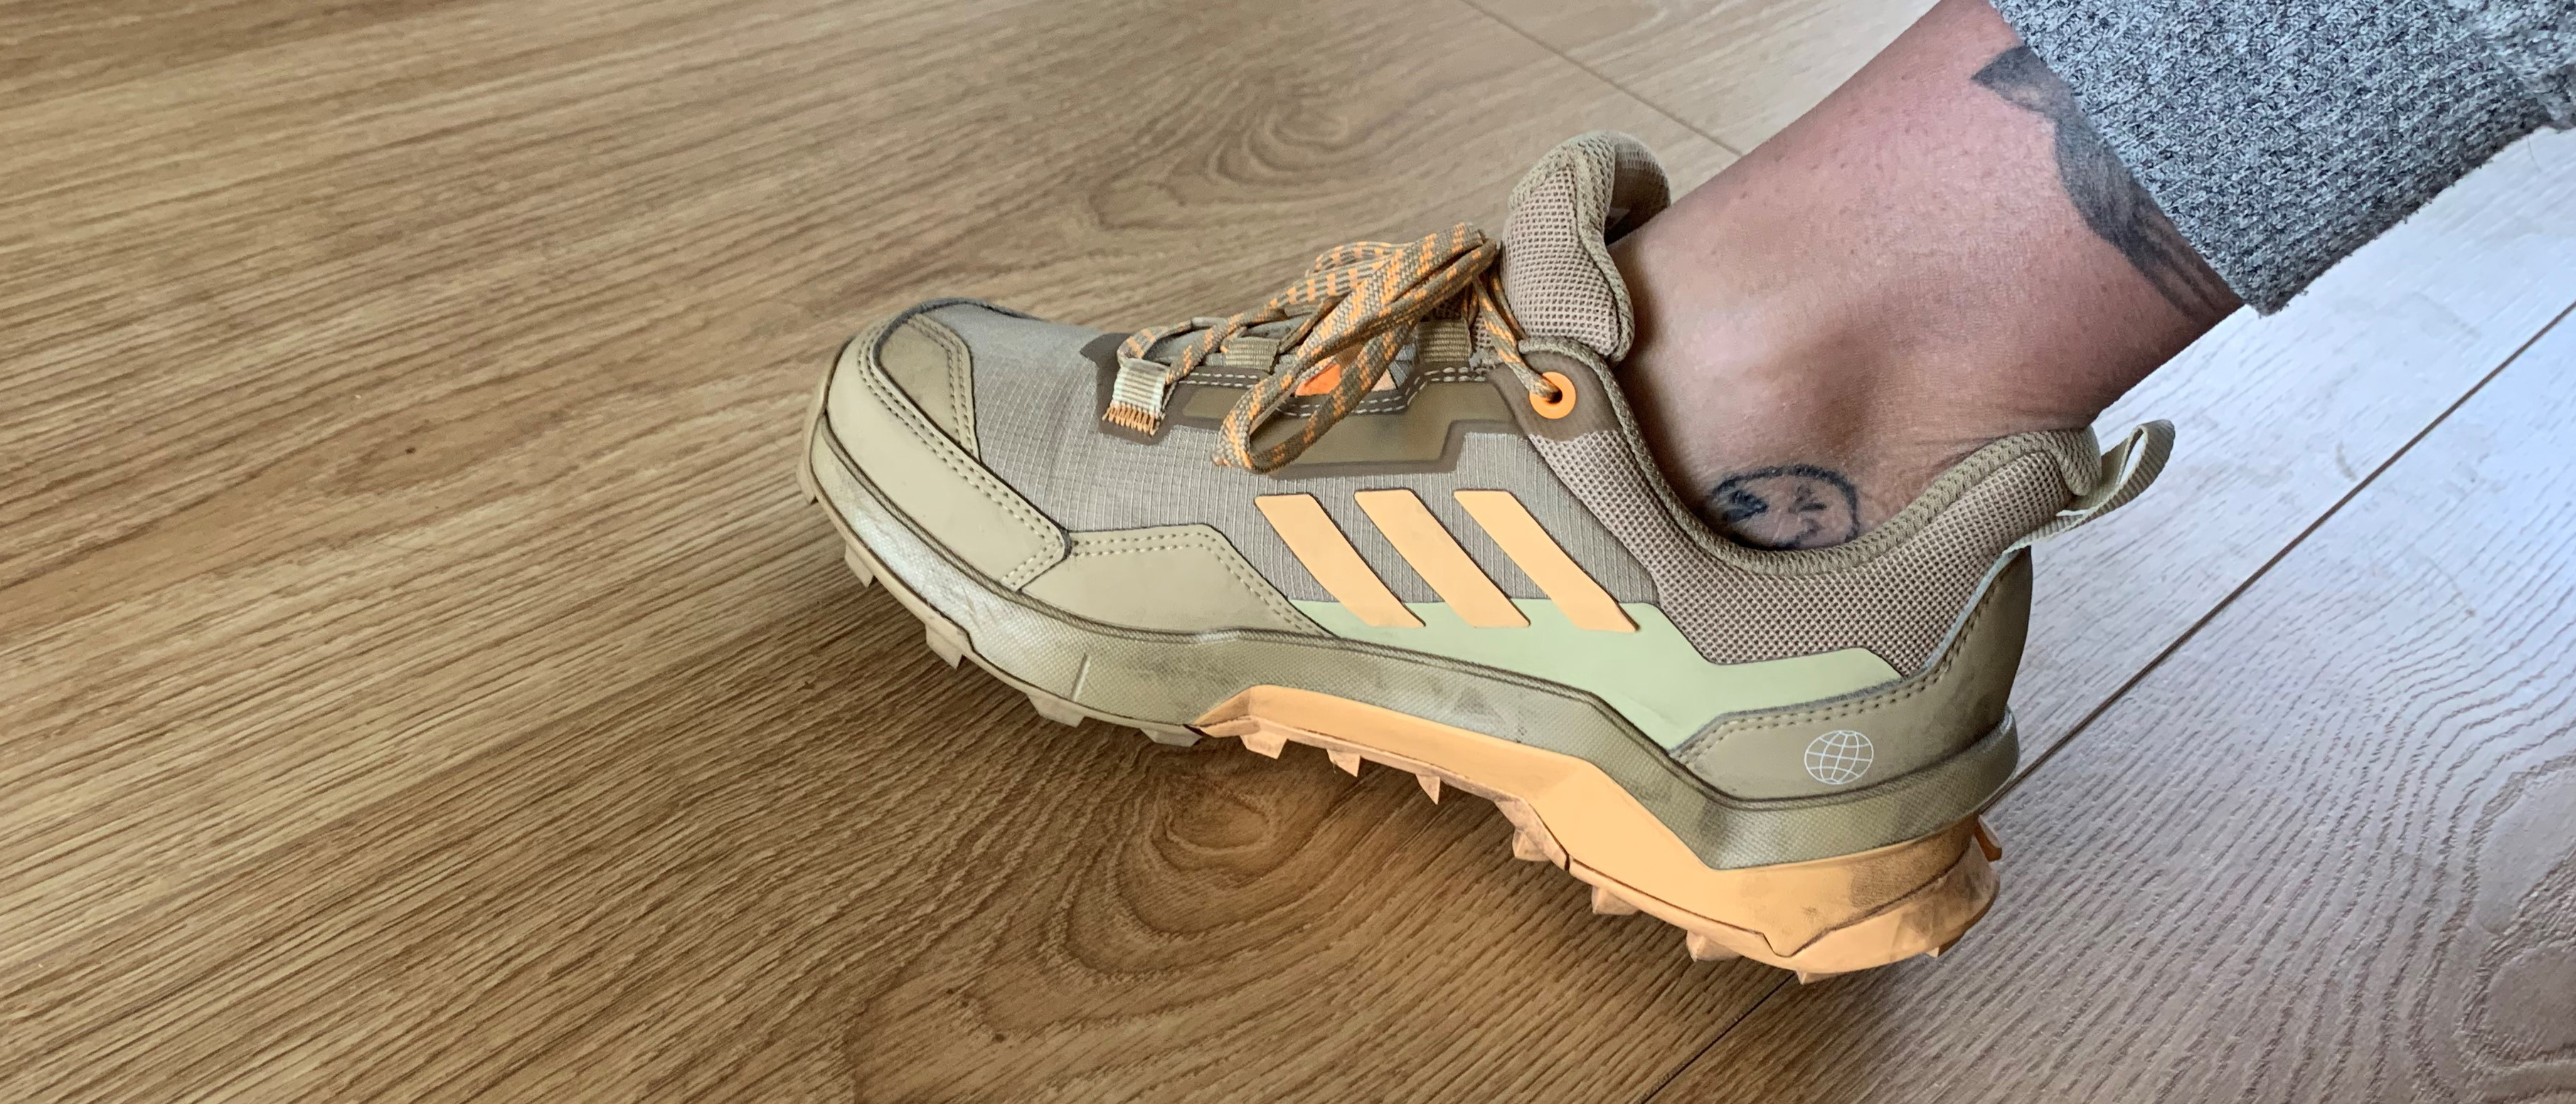 Adidas adidas terrex brown Terrex AX4 GORE-TEX review: A sturdy hiking shoe for the